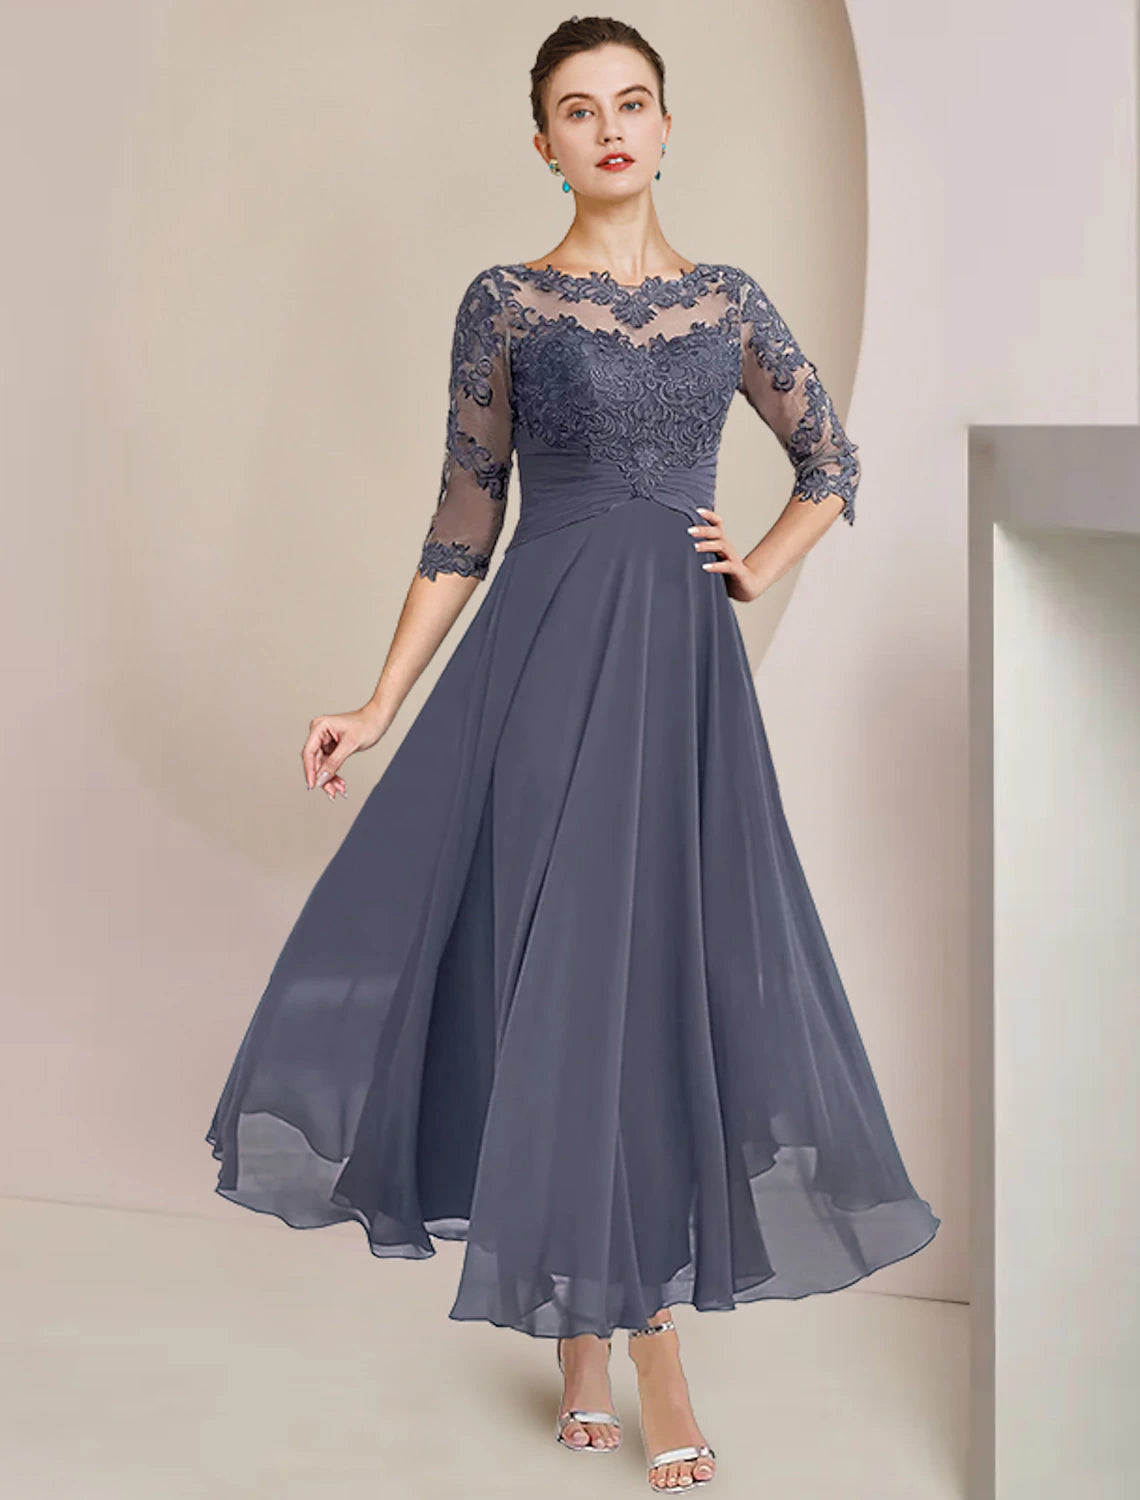 Two Piece A-Line Mother of the Bride Dress Formal Wedding Guest Elegant Scoop Neck Tea Length Chiffon Lace 3/4 Length Sleeve Wrap Included with Appliques Ruching